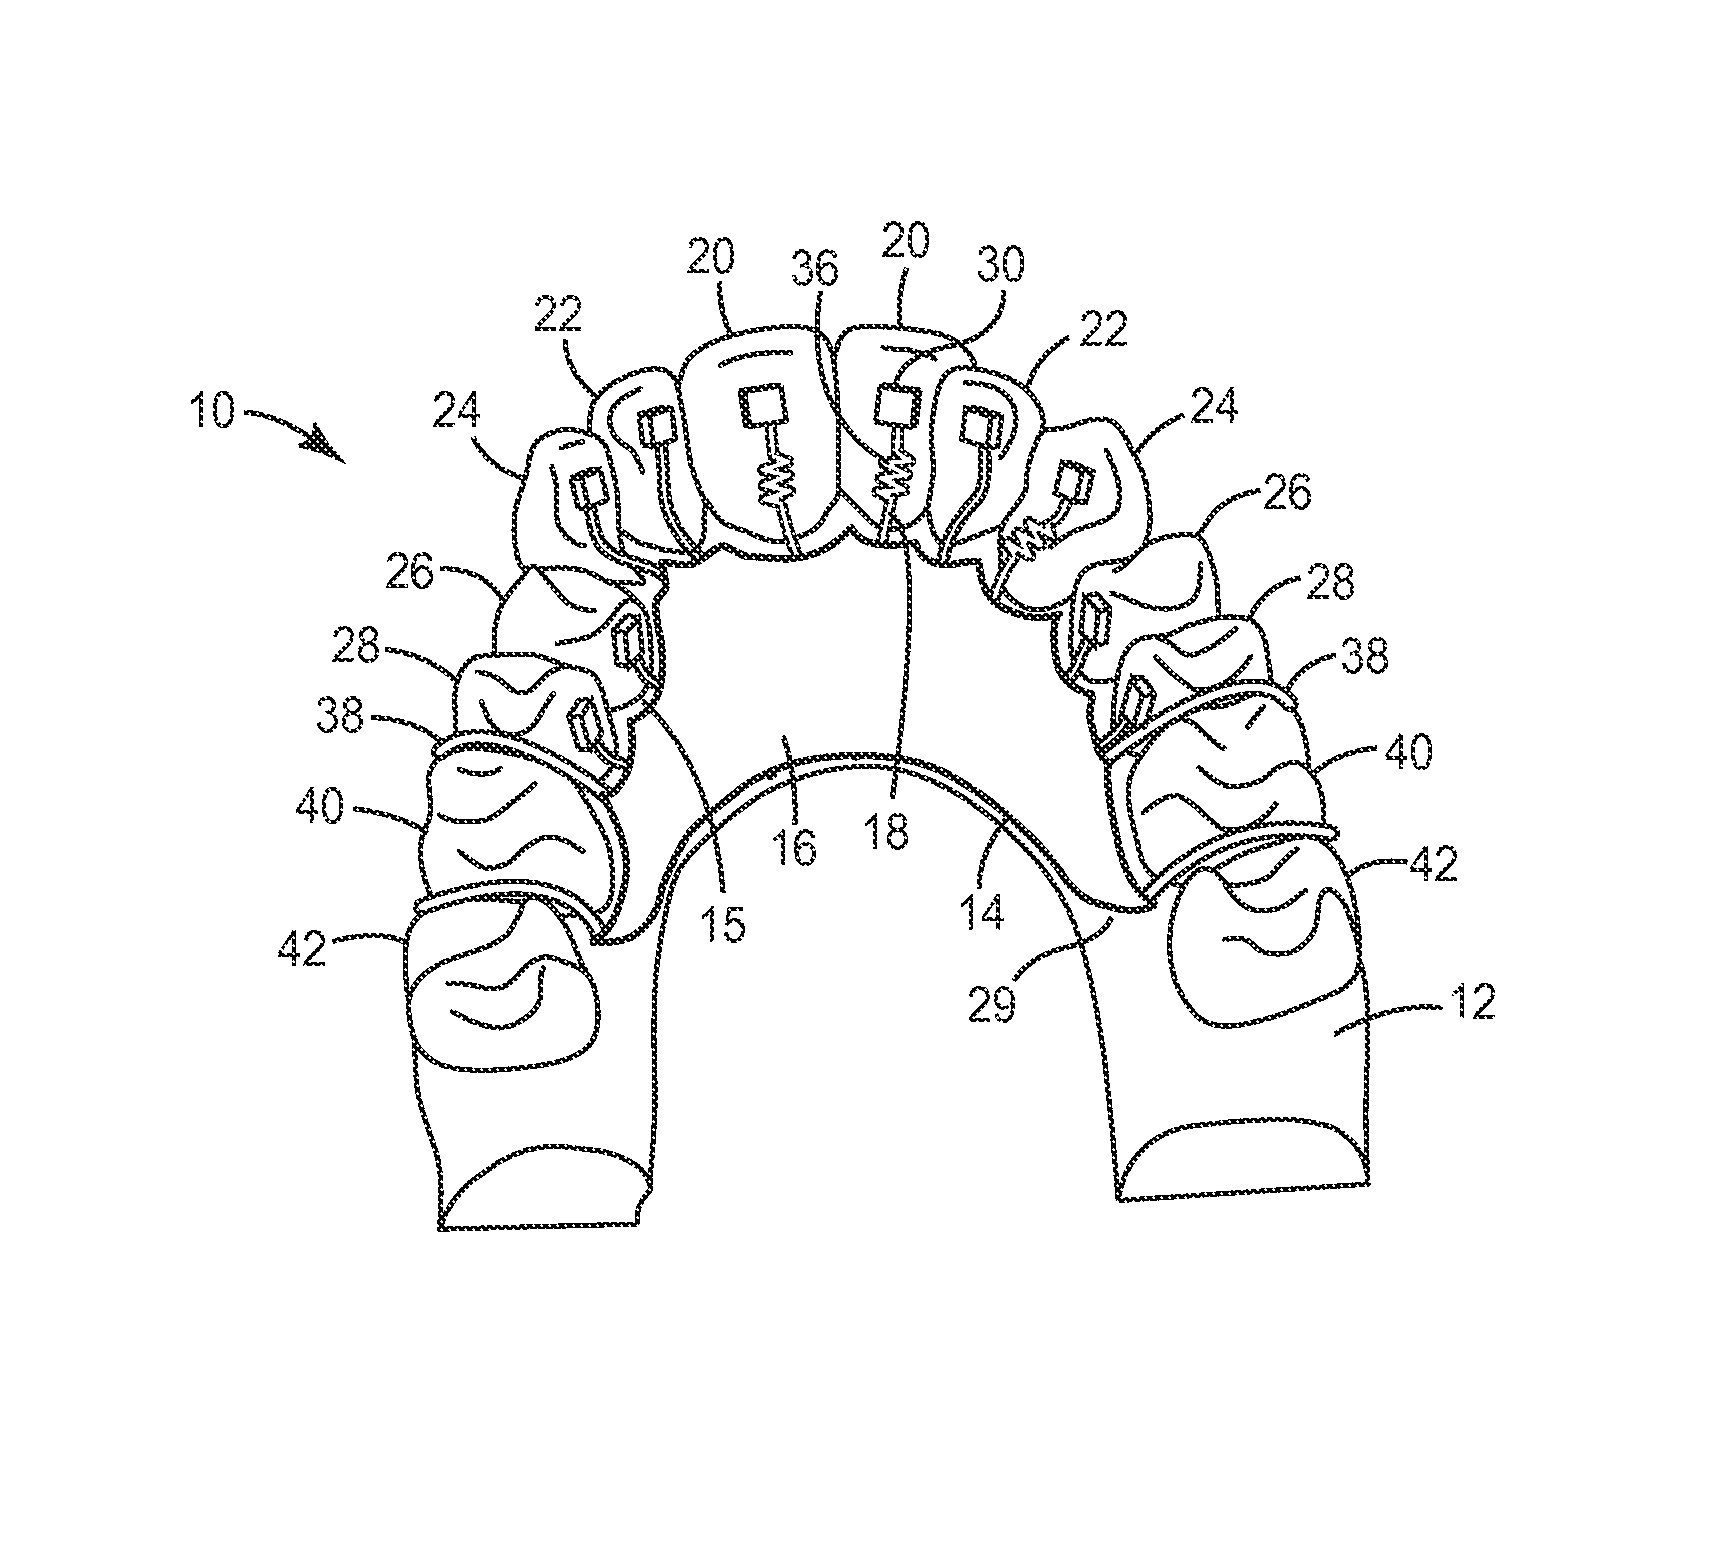 Lingual orthodontic appliance with removable section